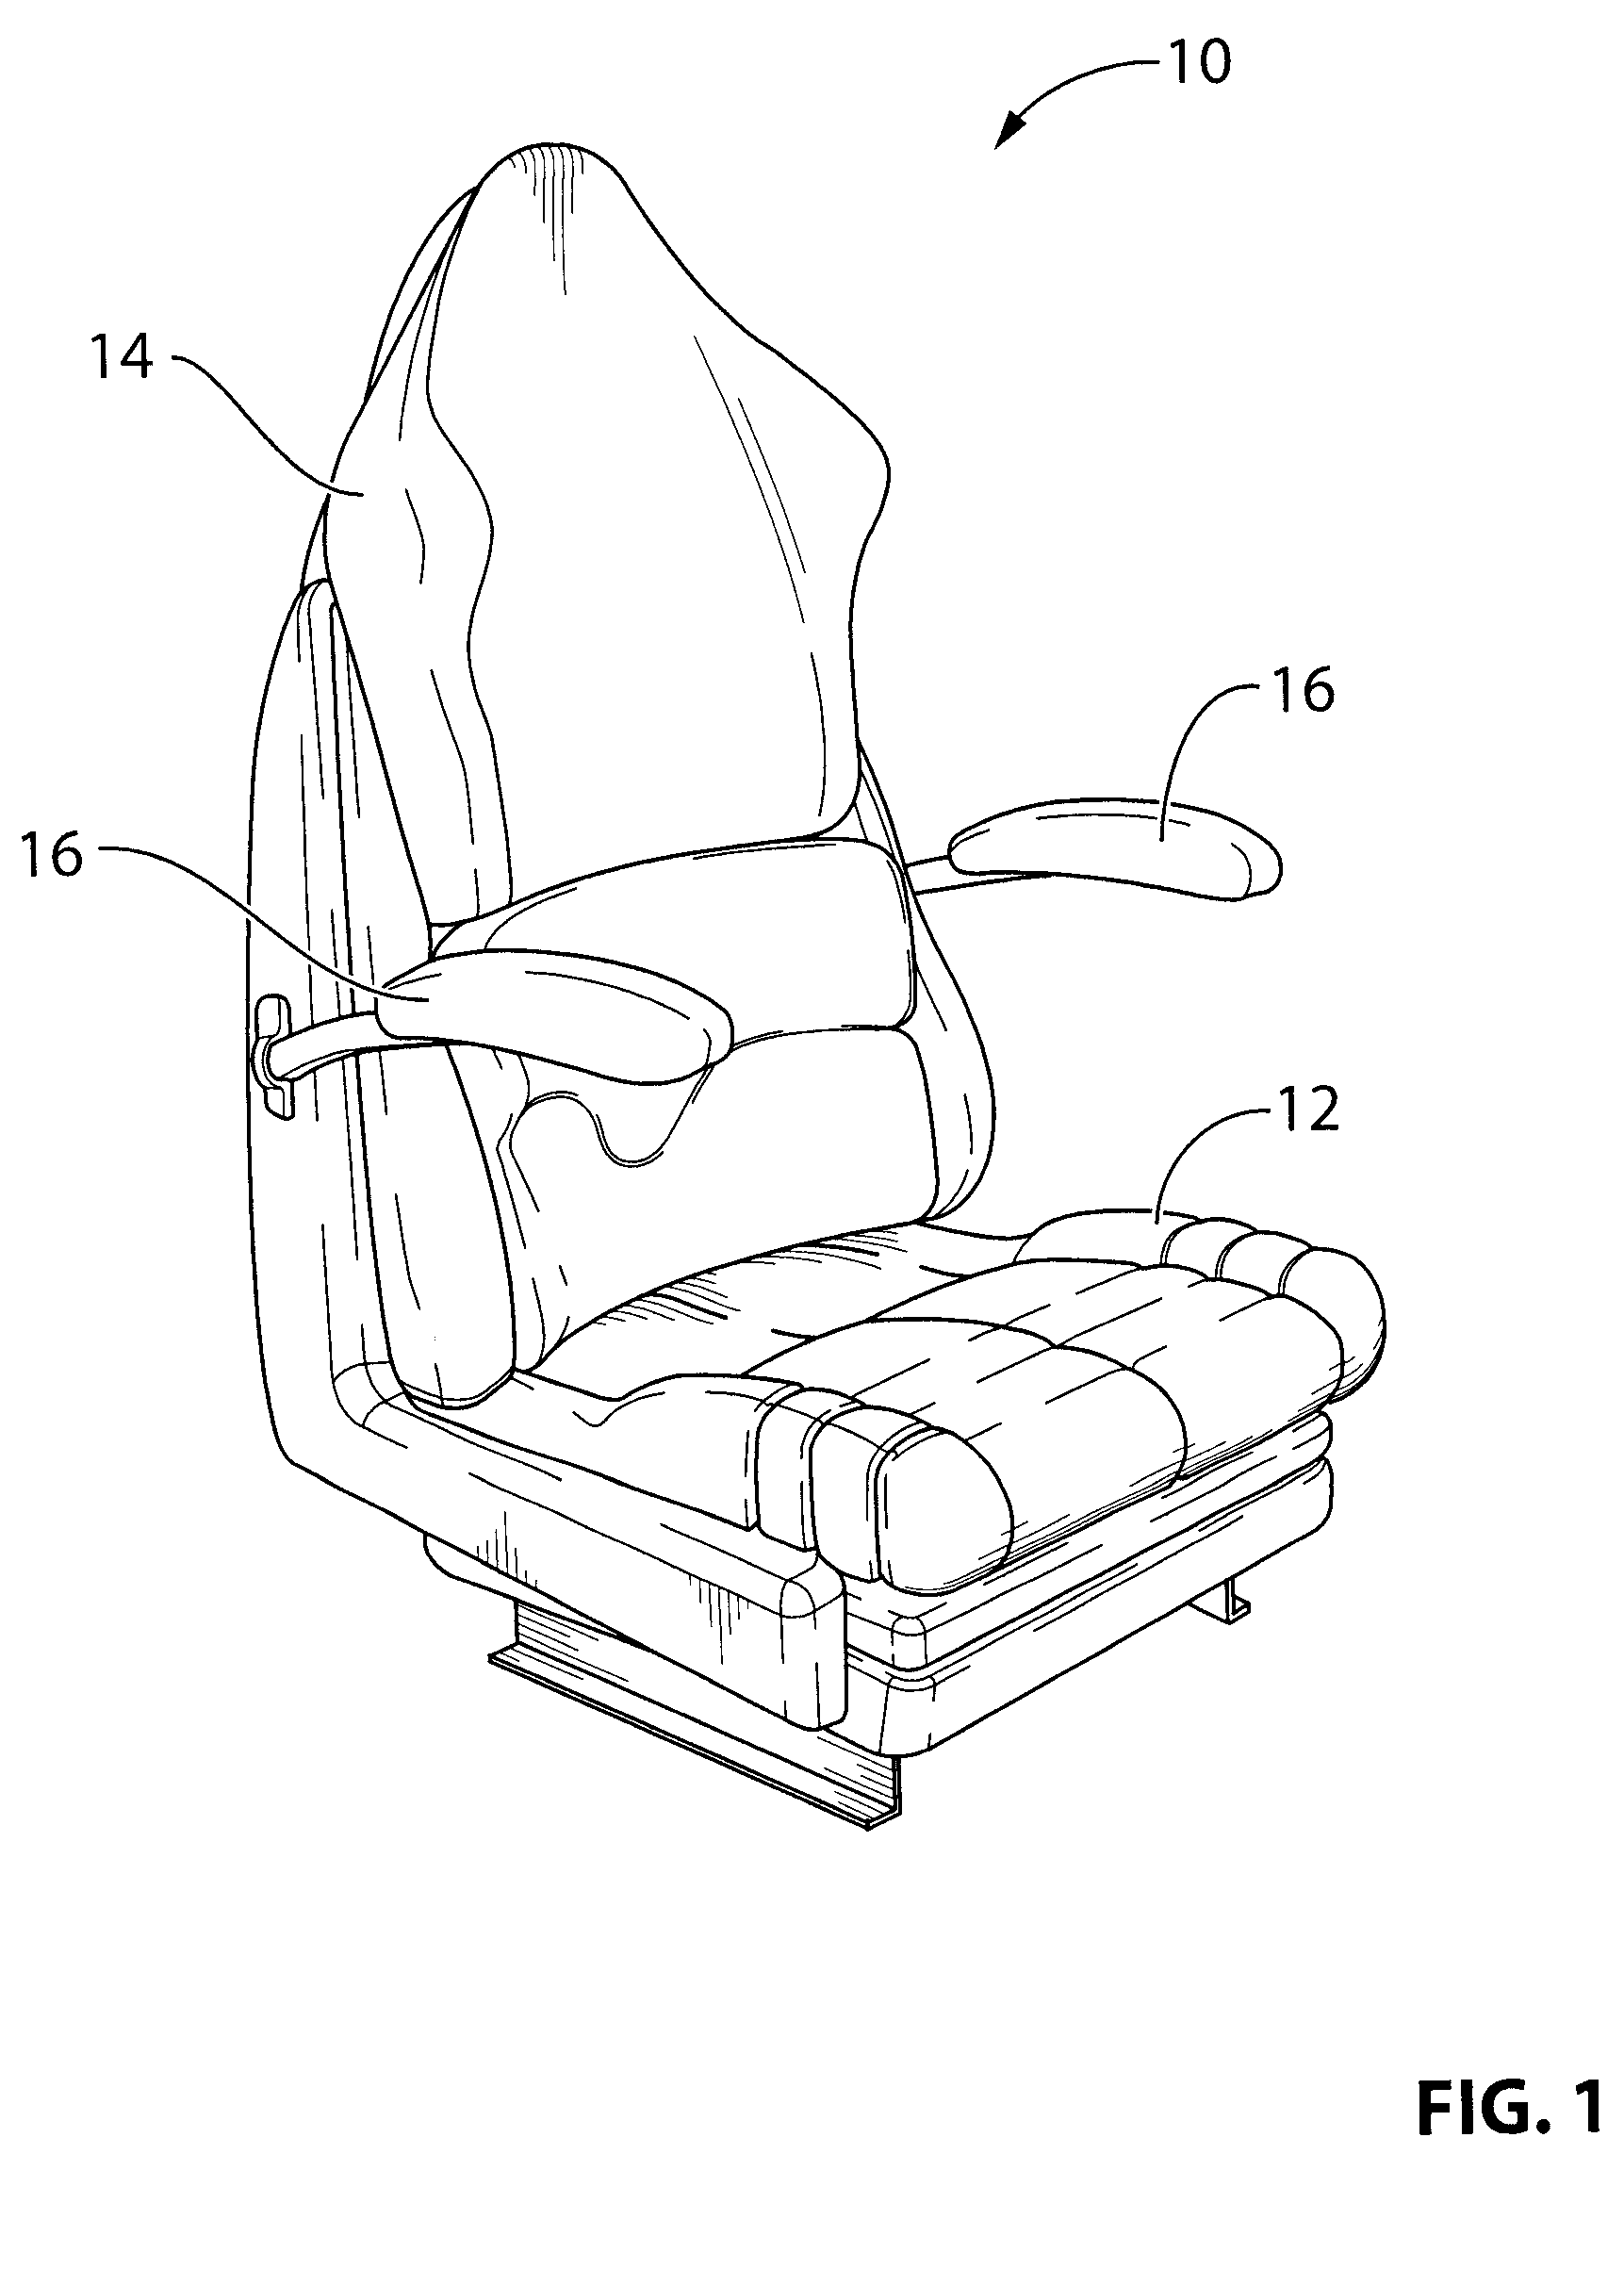 Adjustable seating systems and associated structures